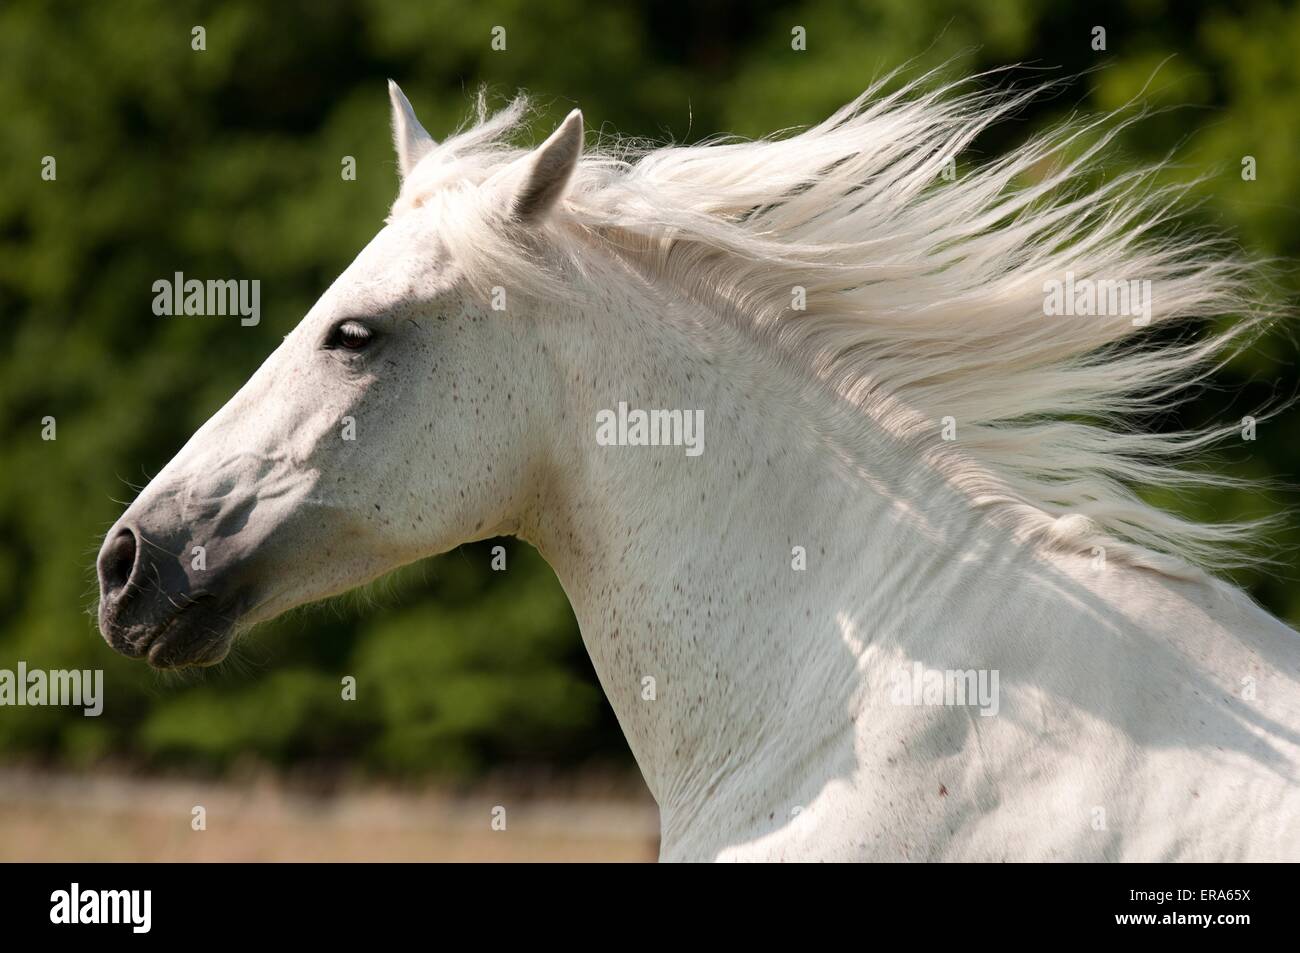 Andalusian horse portrait Stock Photo